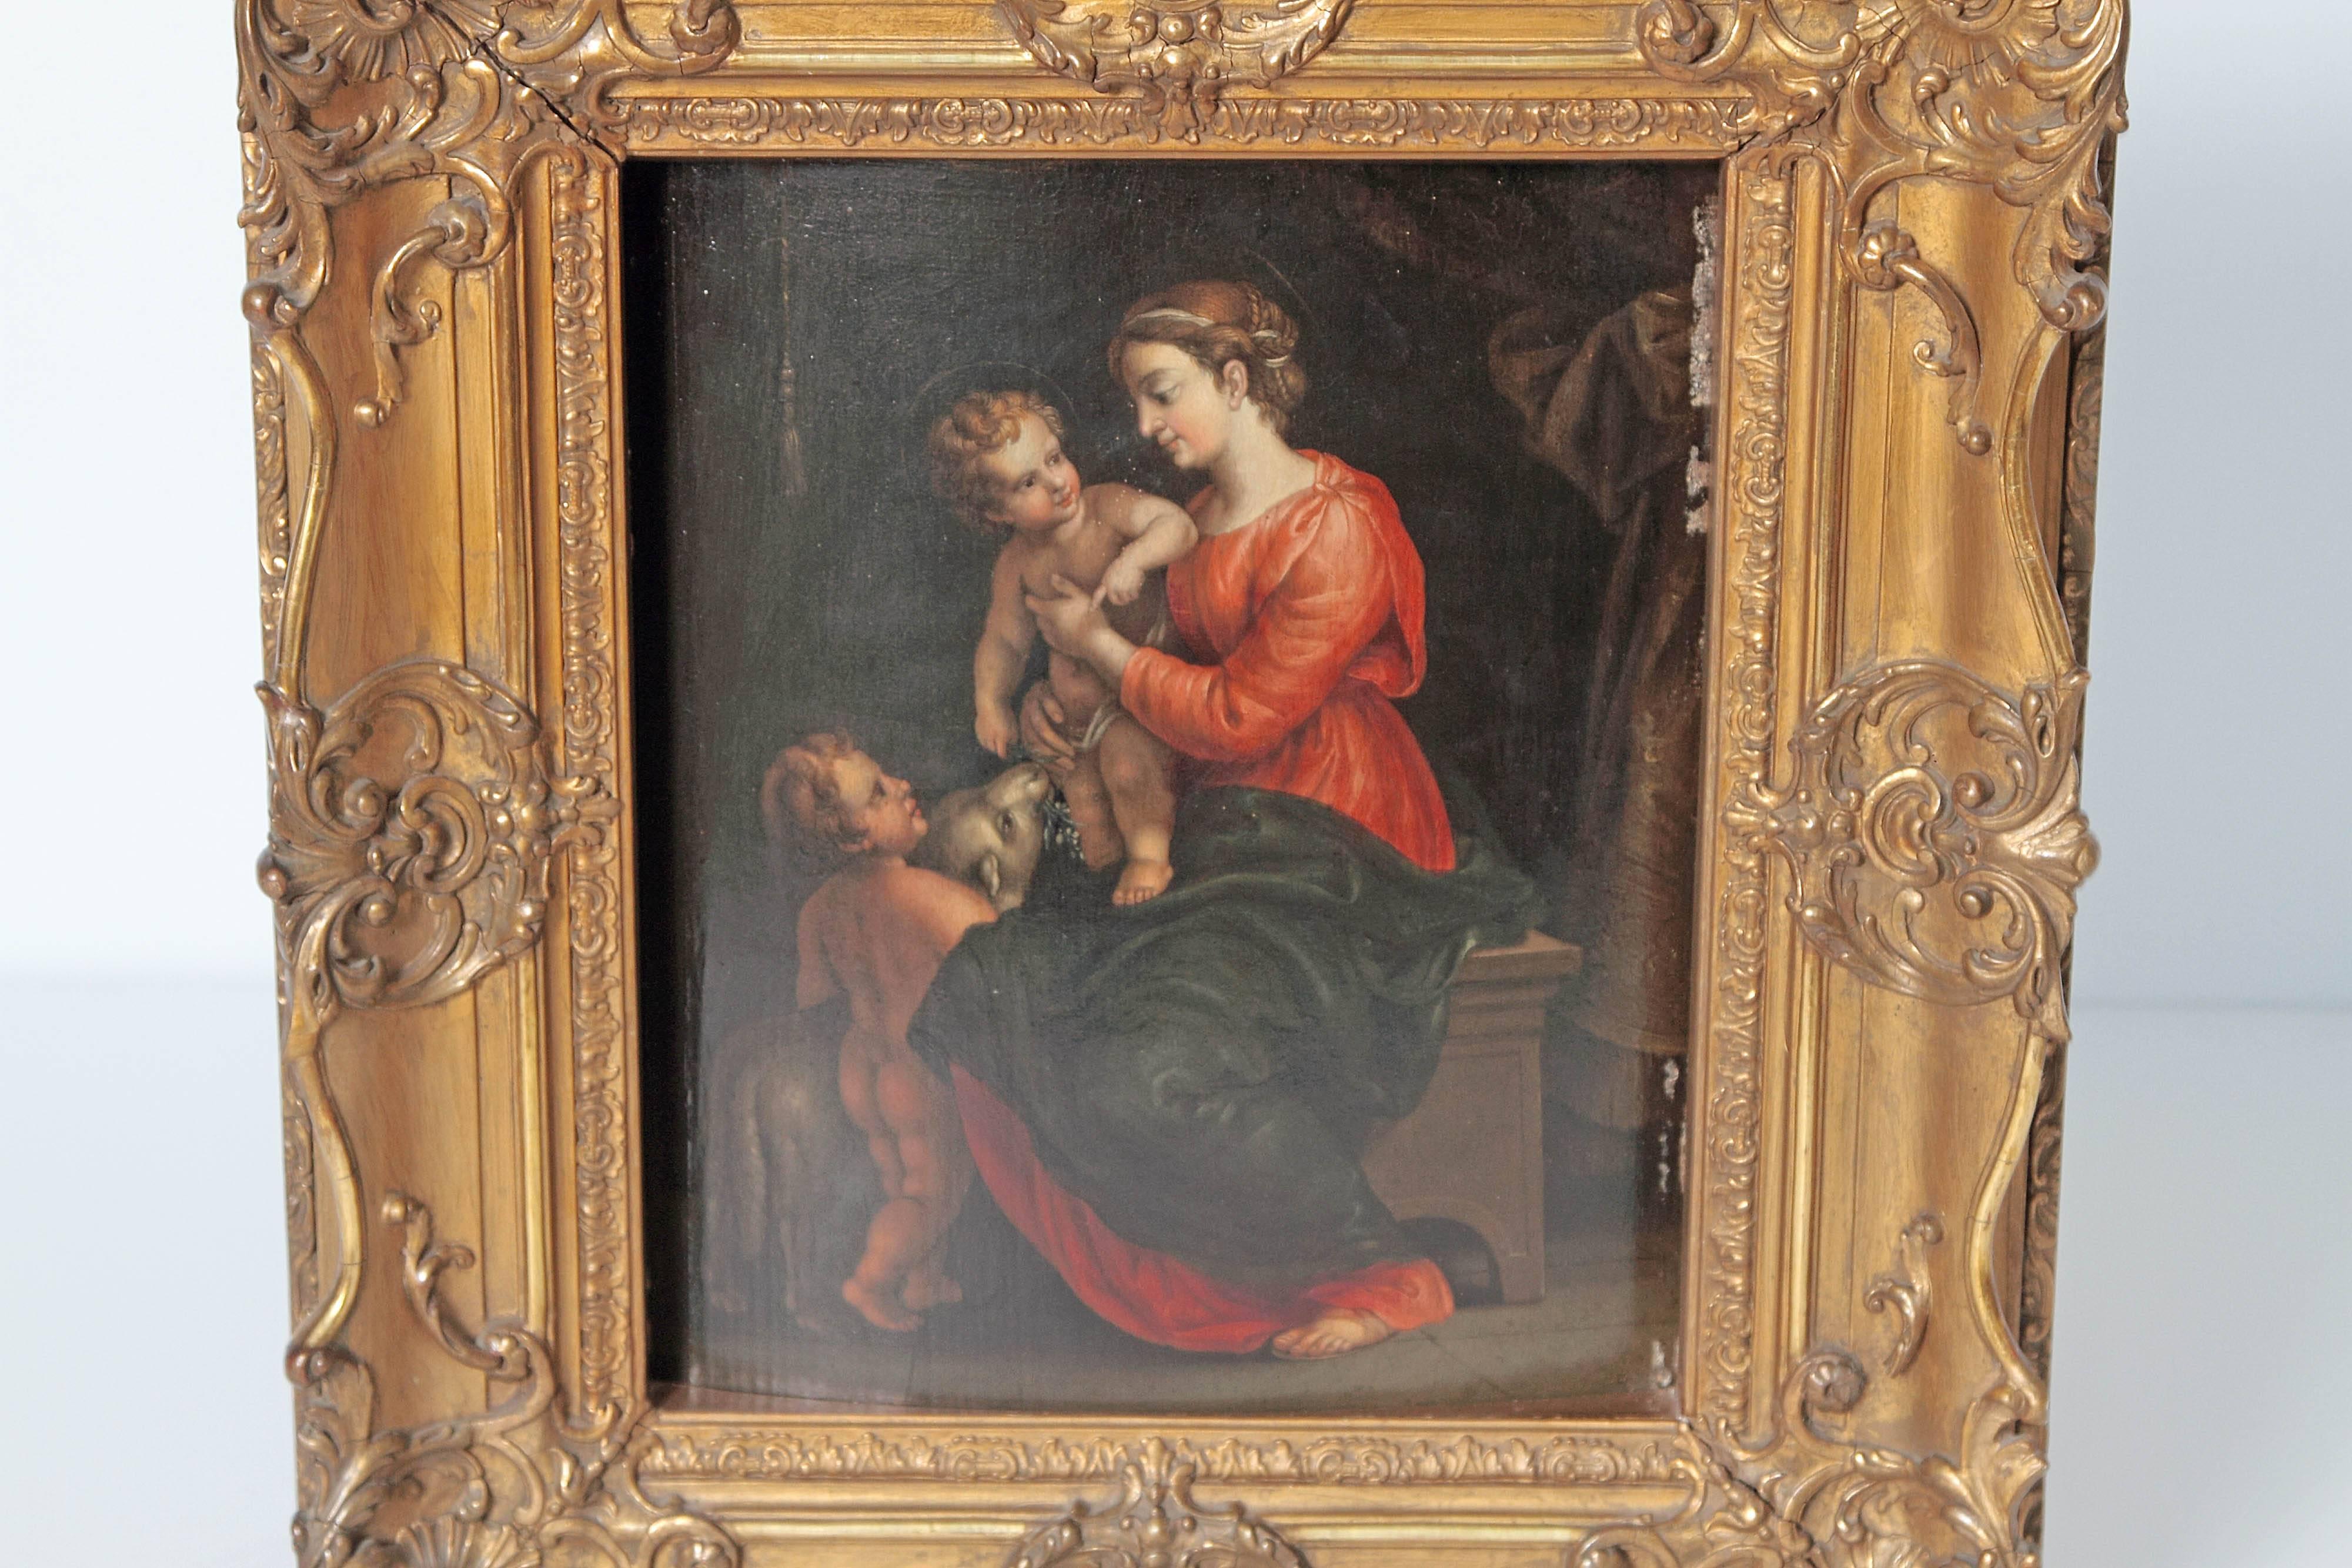 Catholic picture / religious painting / Christian oil on board, framed in an elaborate gilded frame, carved with gesso, the Madonna and Child (the Virgin Mary and Jesus / the Christ child) with the infant St. John the Baptist and the Lamb, the lamb